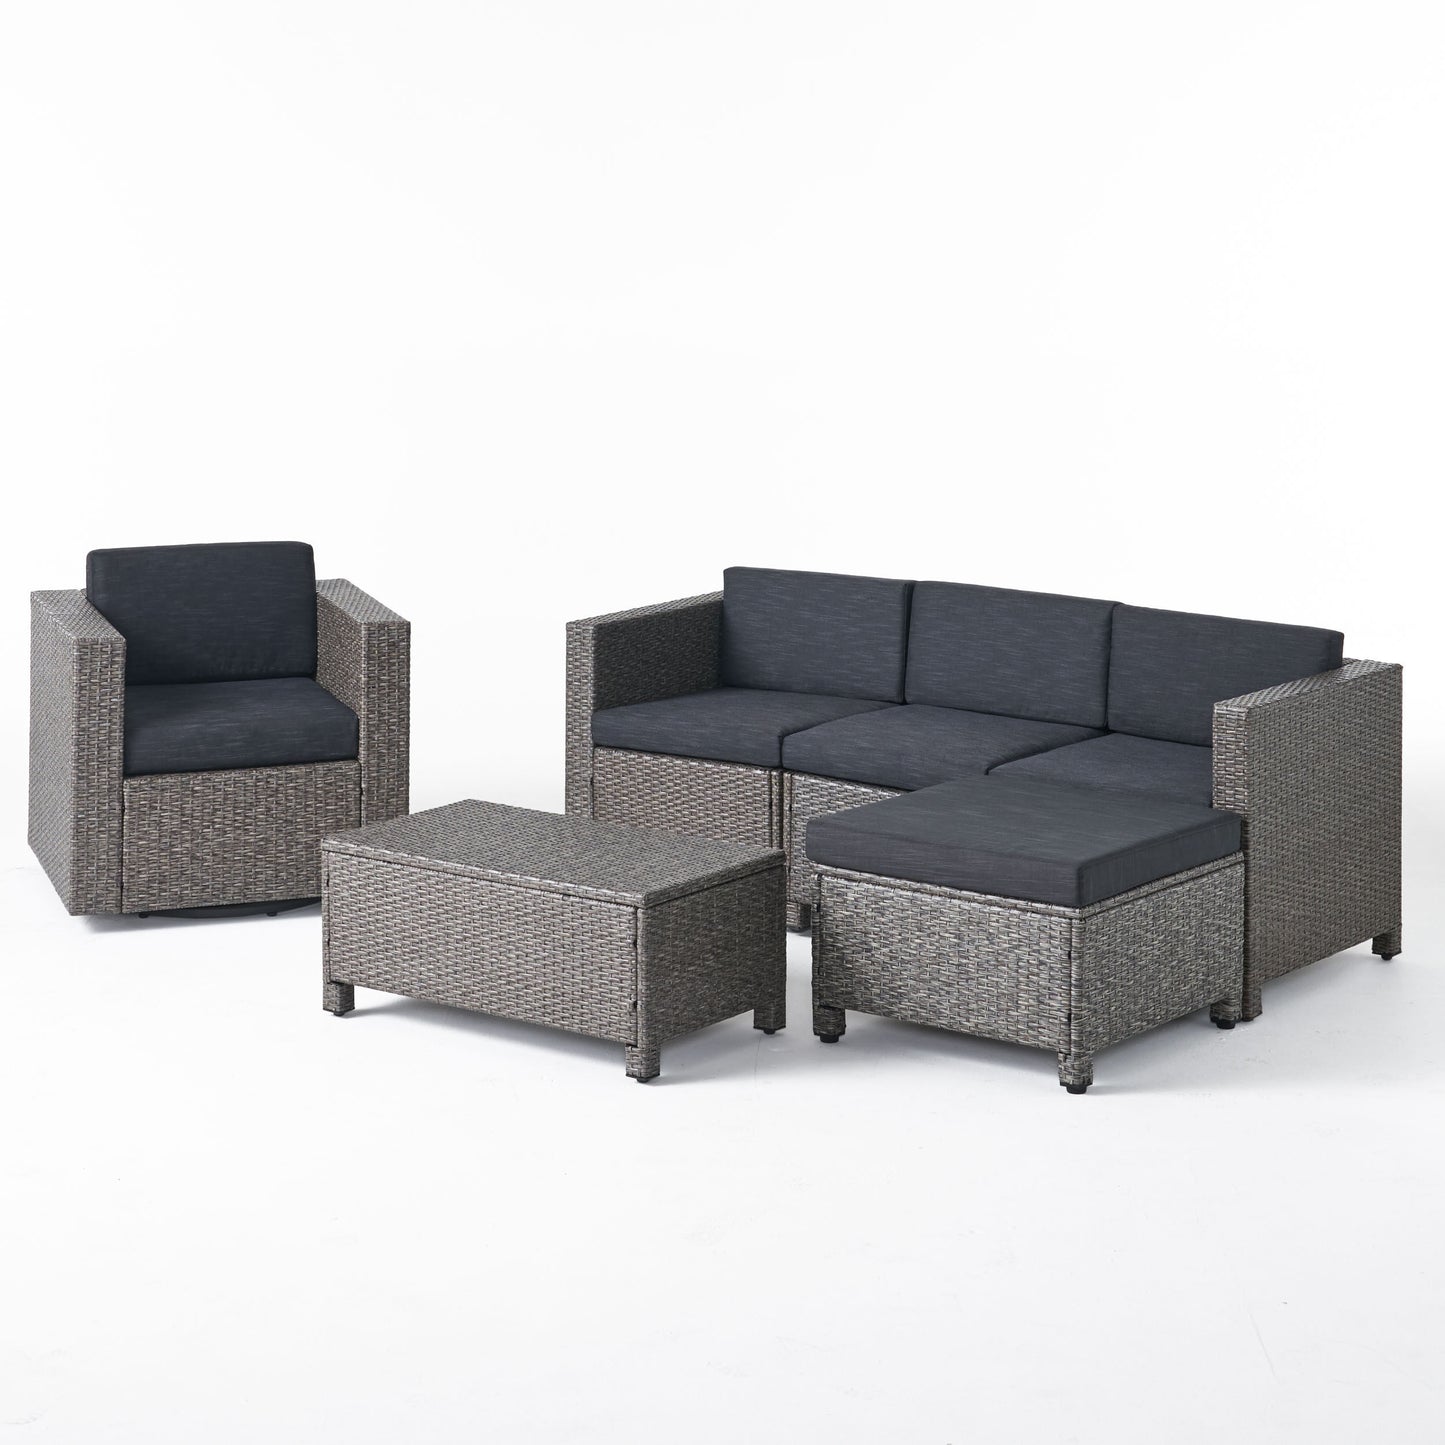 Buzz Outdoor 4 Seater Wicker L-Shaped Sectional Sofa Set with Cushions, Mixed Black with Dark Grey Cushions